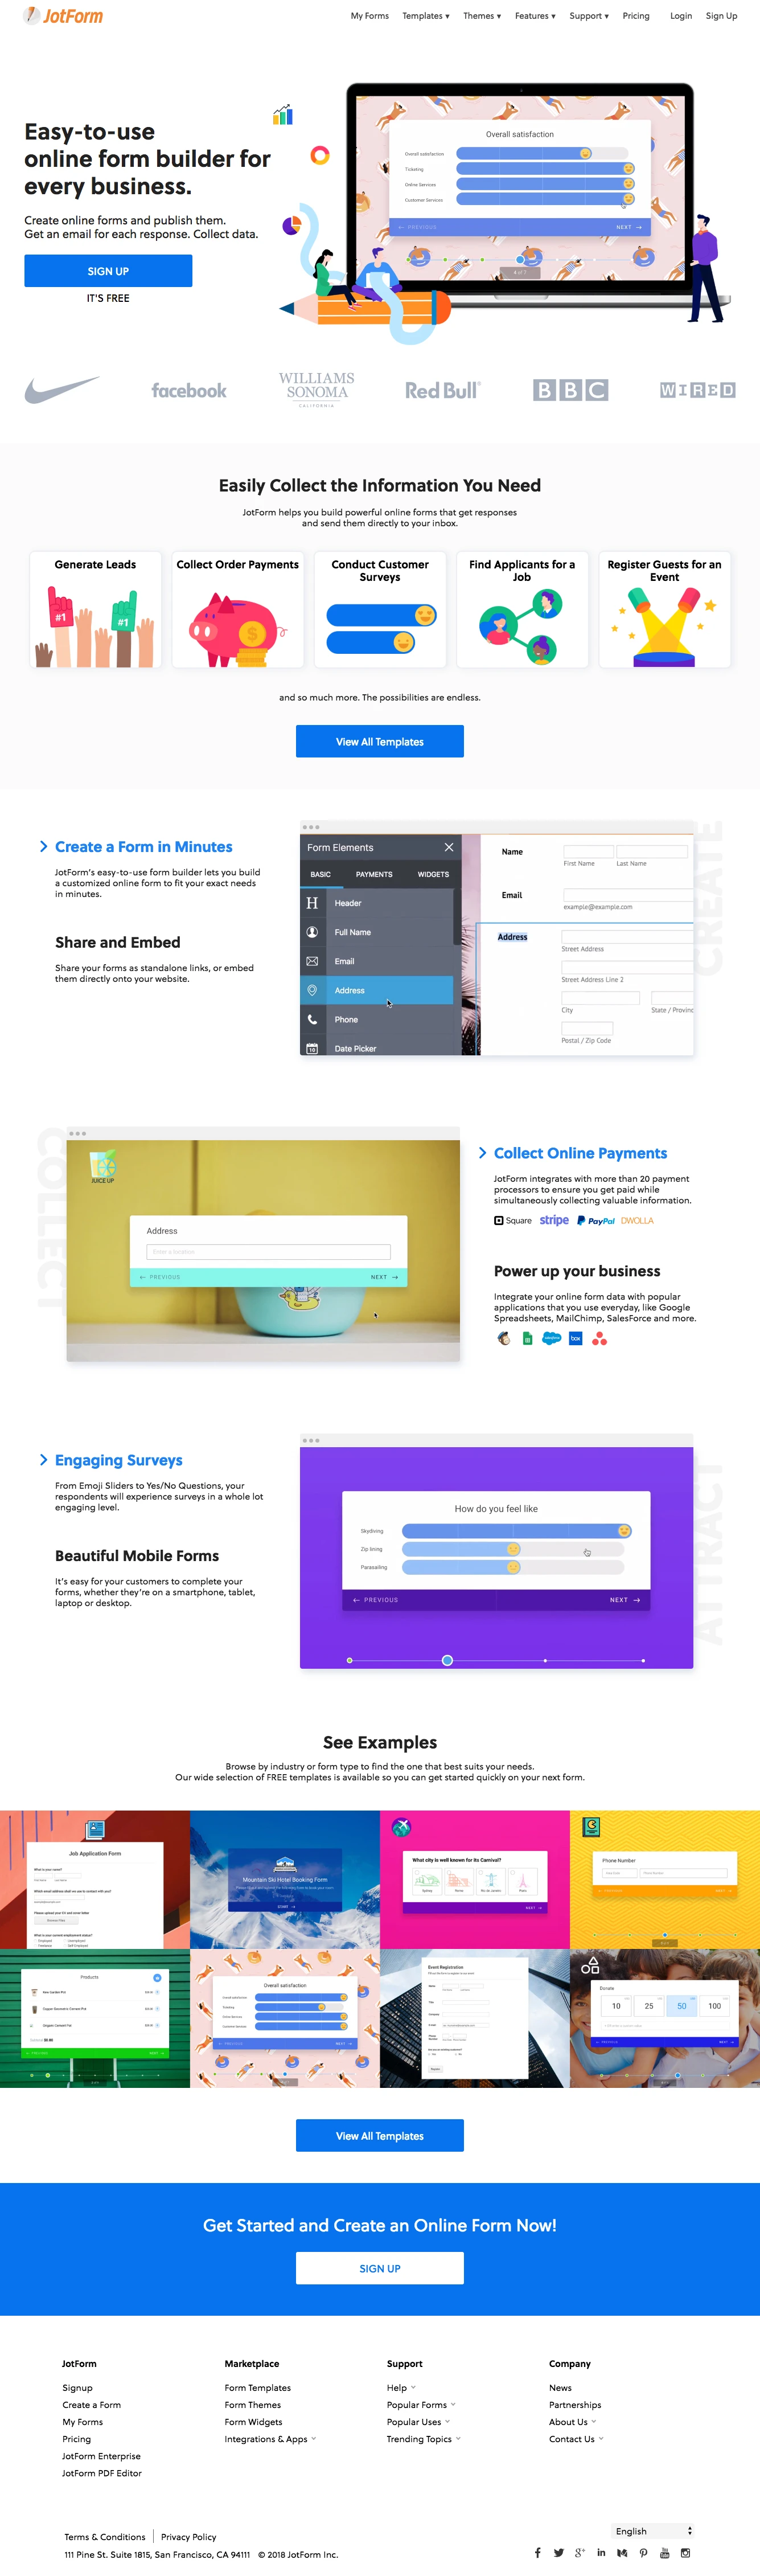 JotForm Landing Page Example: JotForm helps you build powerful online forms that get responses and send them directly to your inbox.